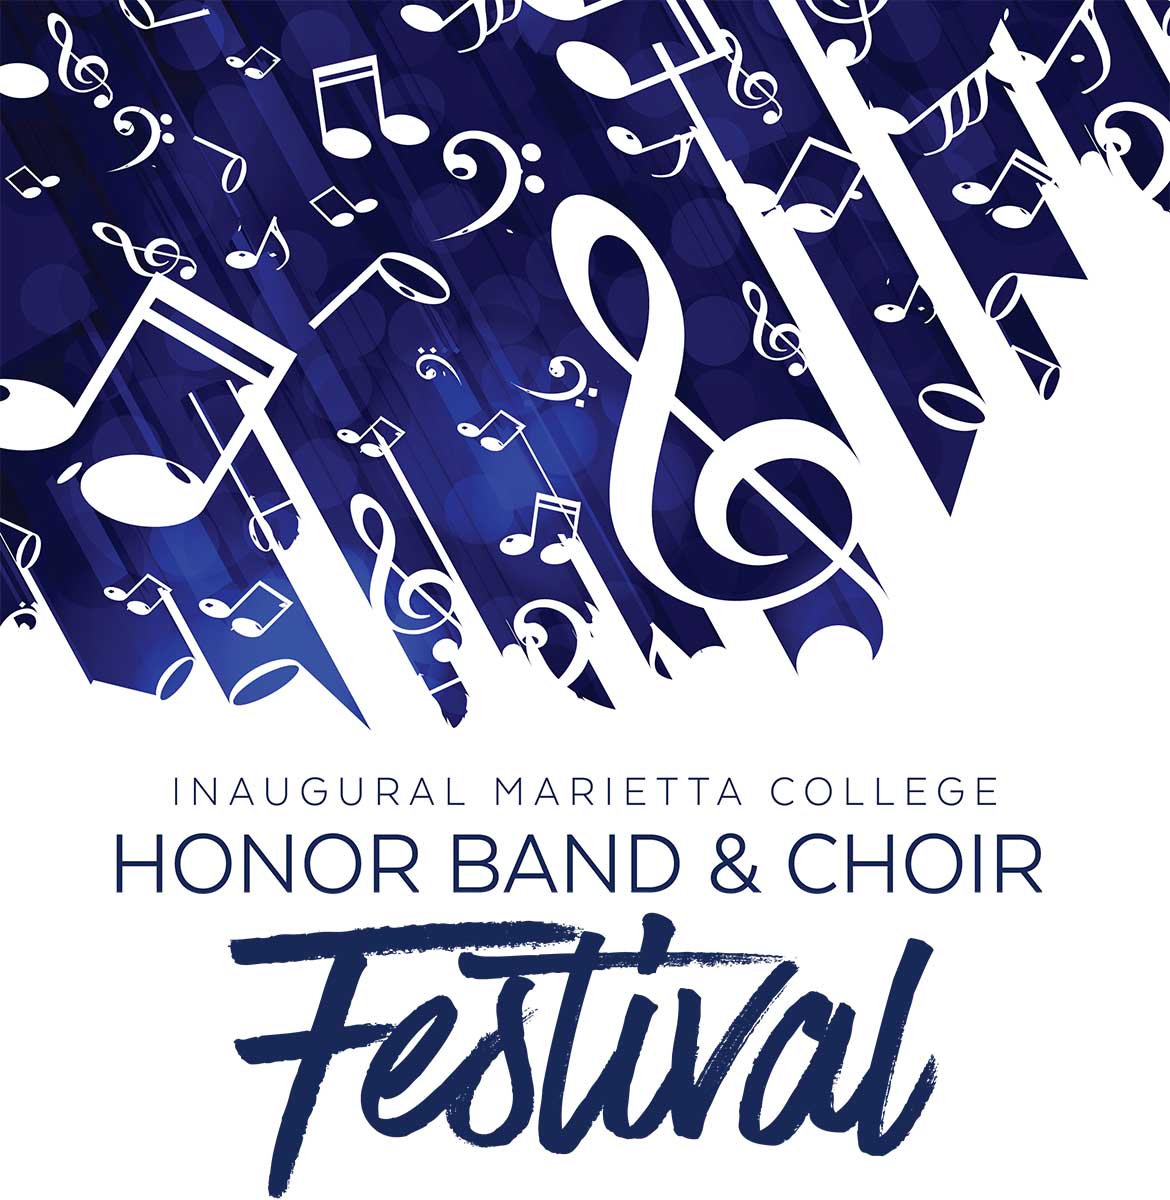 Marietta College image for the honor band and choir festival